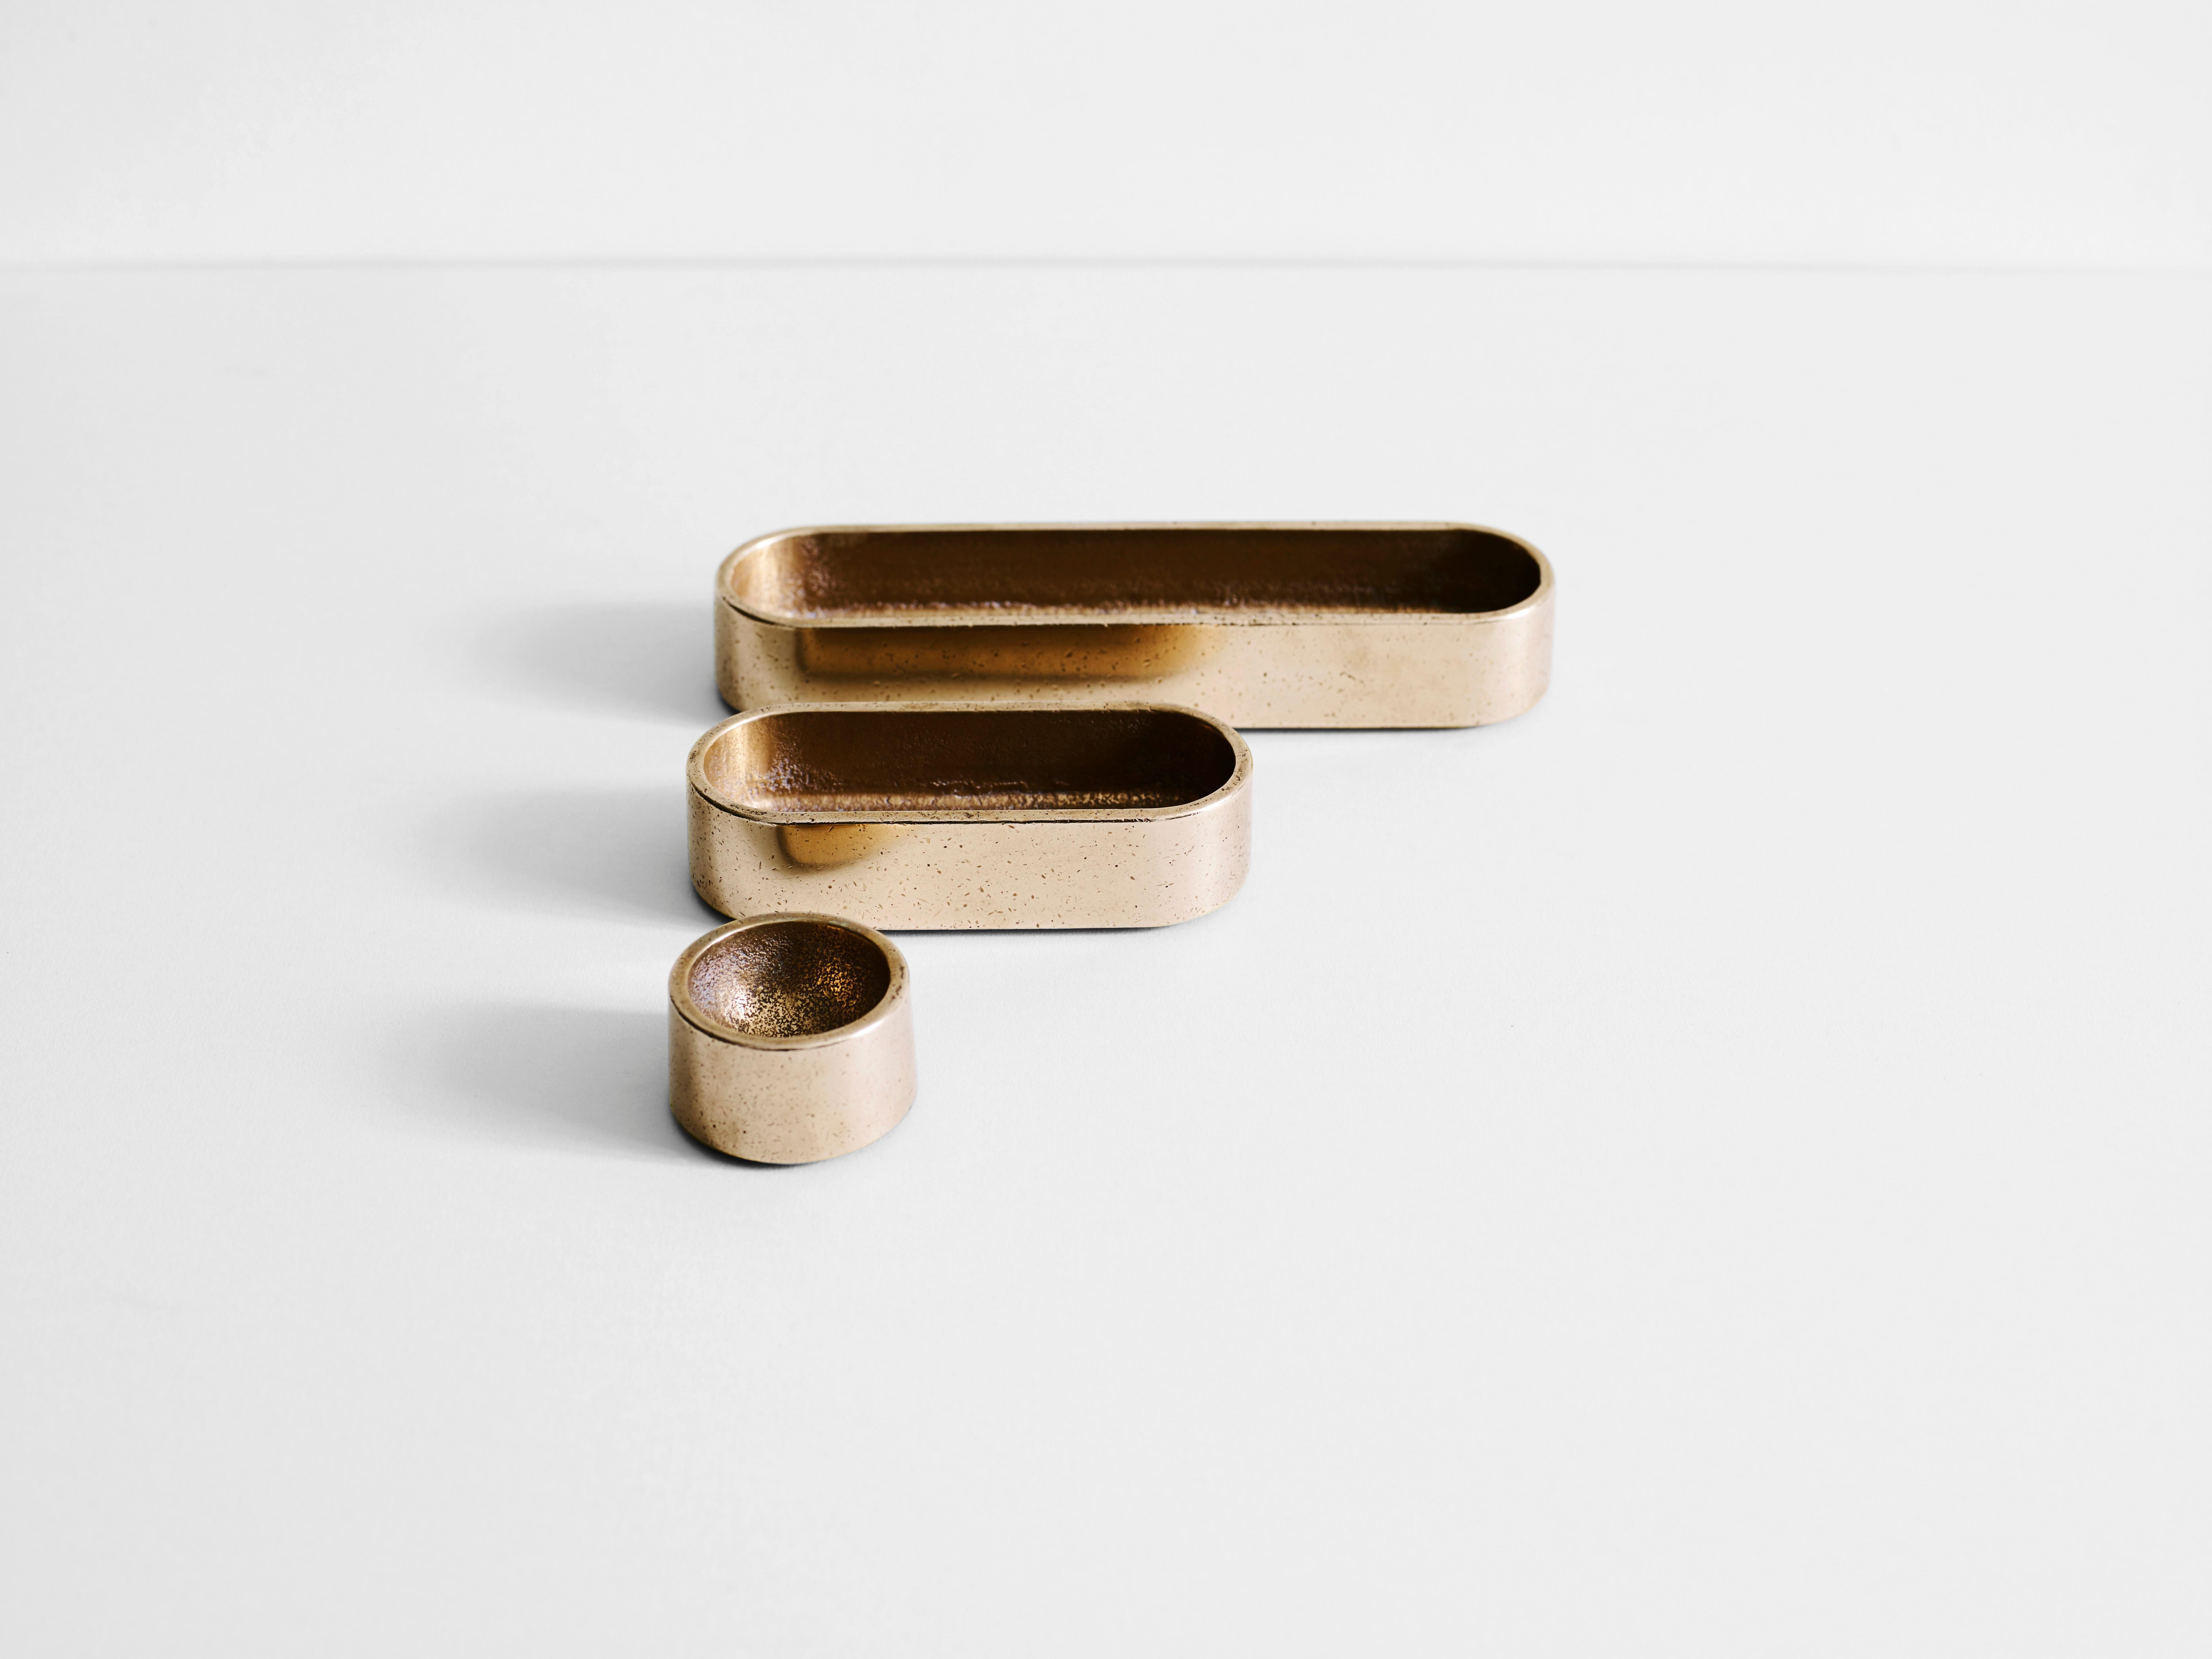 Bronze Stack Trays by Henry Wilson
Dimesions: W 25 x D 5 x H 10 cm
Materials: Bronze

The stack trays are sold in a set of three that can be used together or individually. Group them on your desk, dining table, or next to the bed. The stack trays